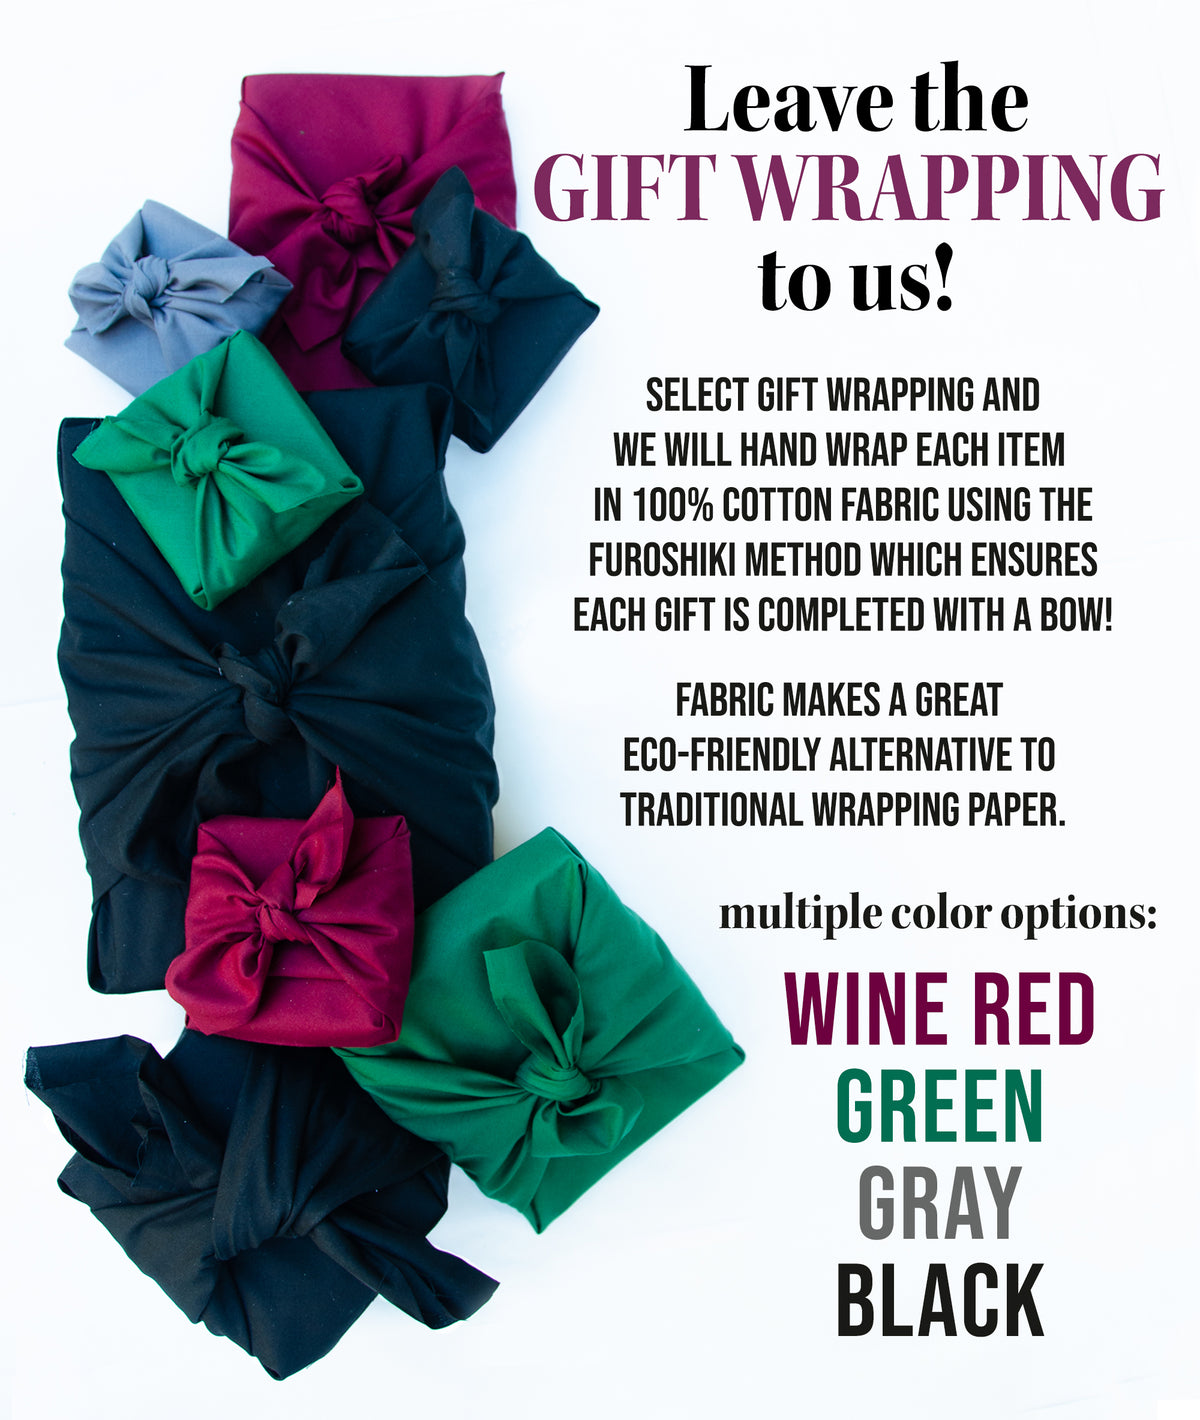 gift wrapping option available in wine red, green , gray and black